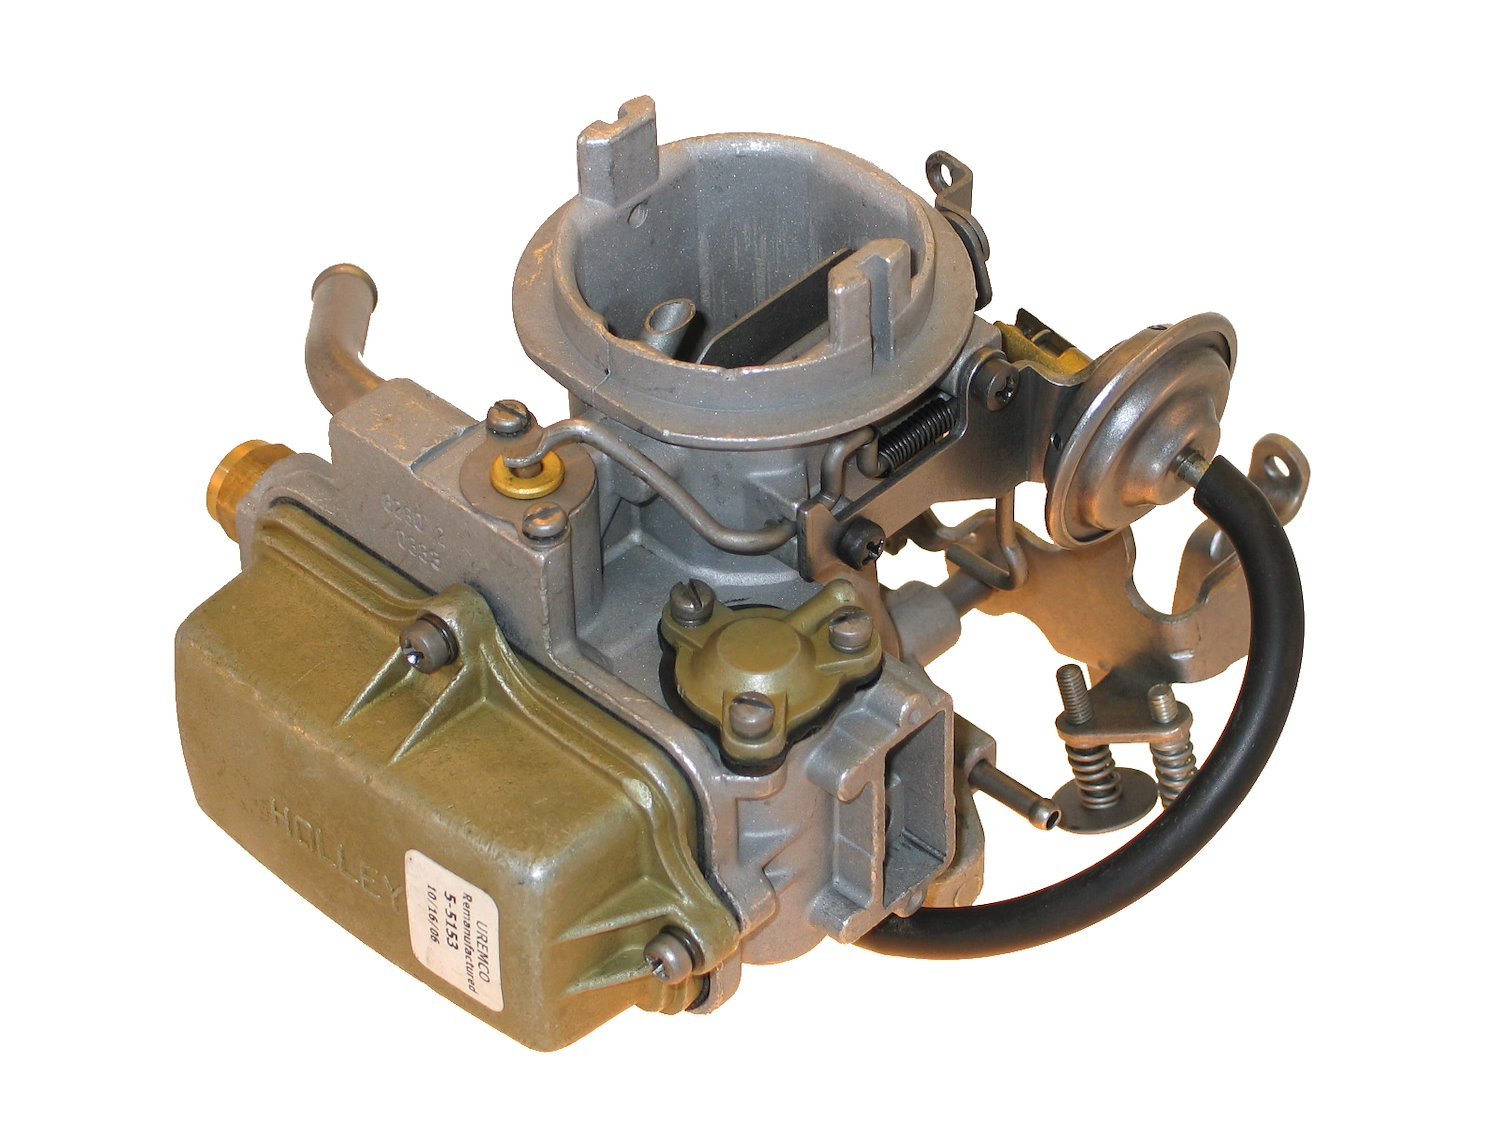 7-7104 Holley Remanufactured Carburetor, 1920-Style